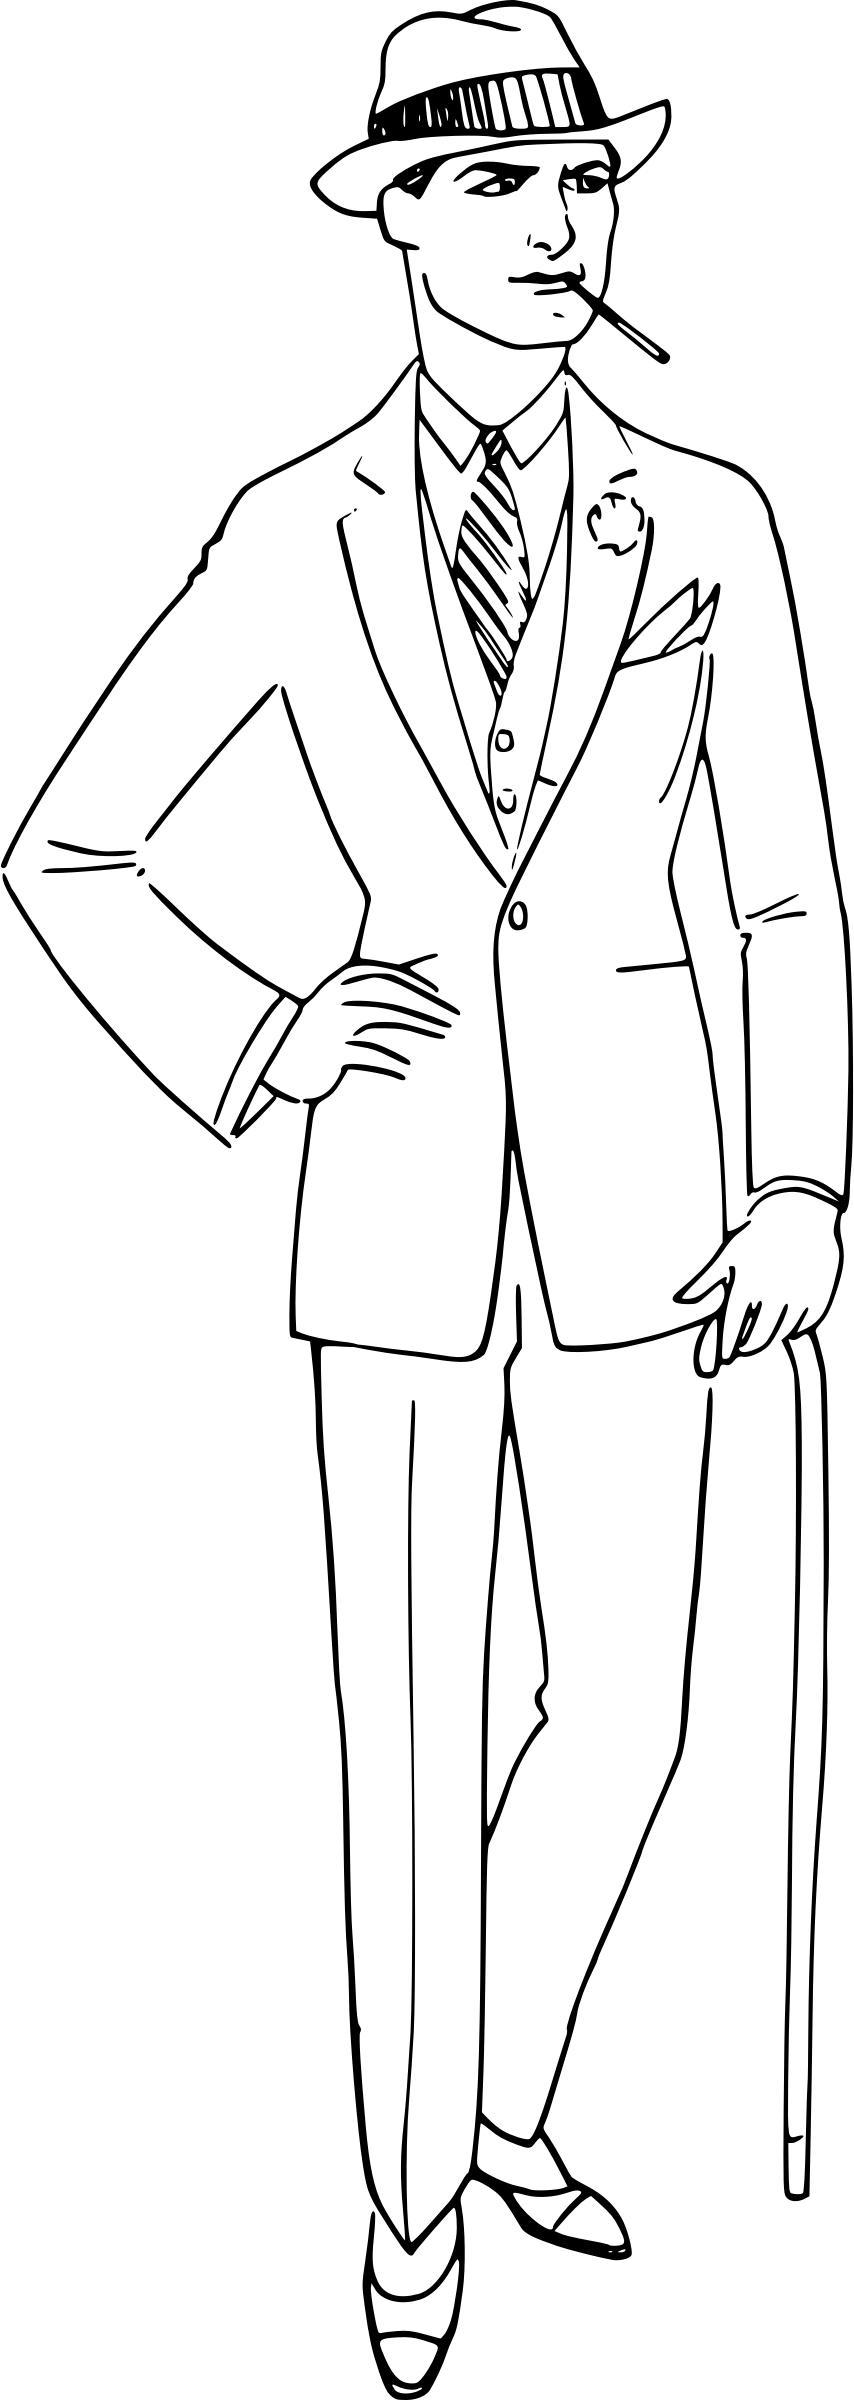 Man in a White Suit png transparent